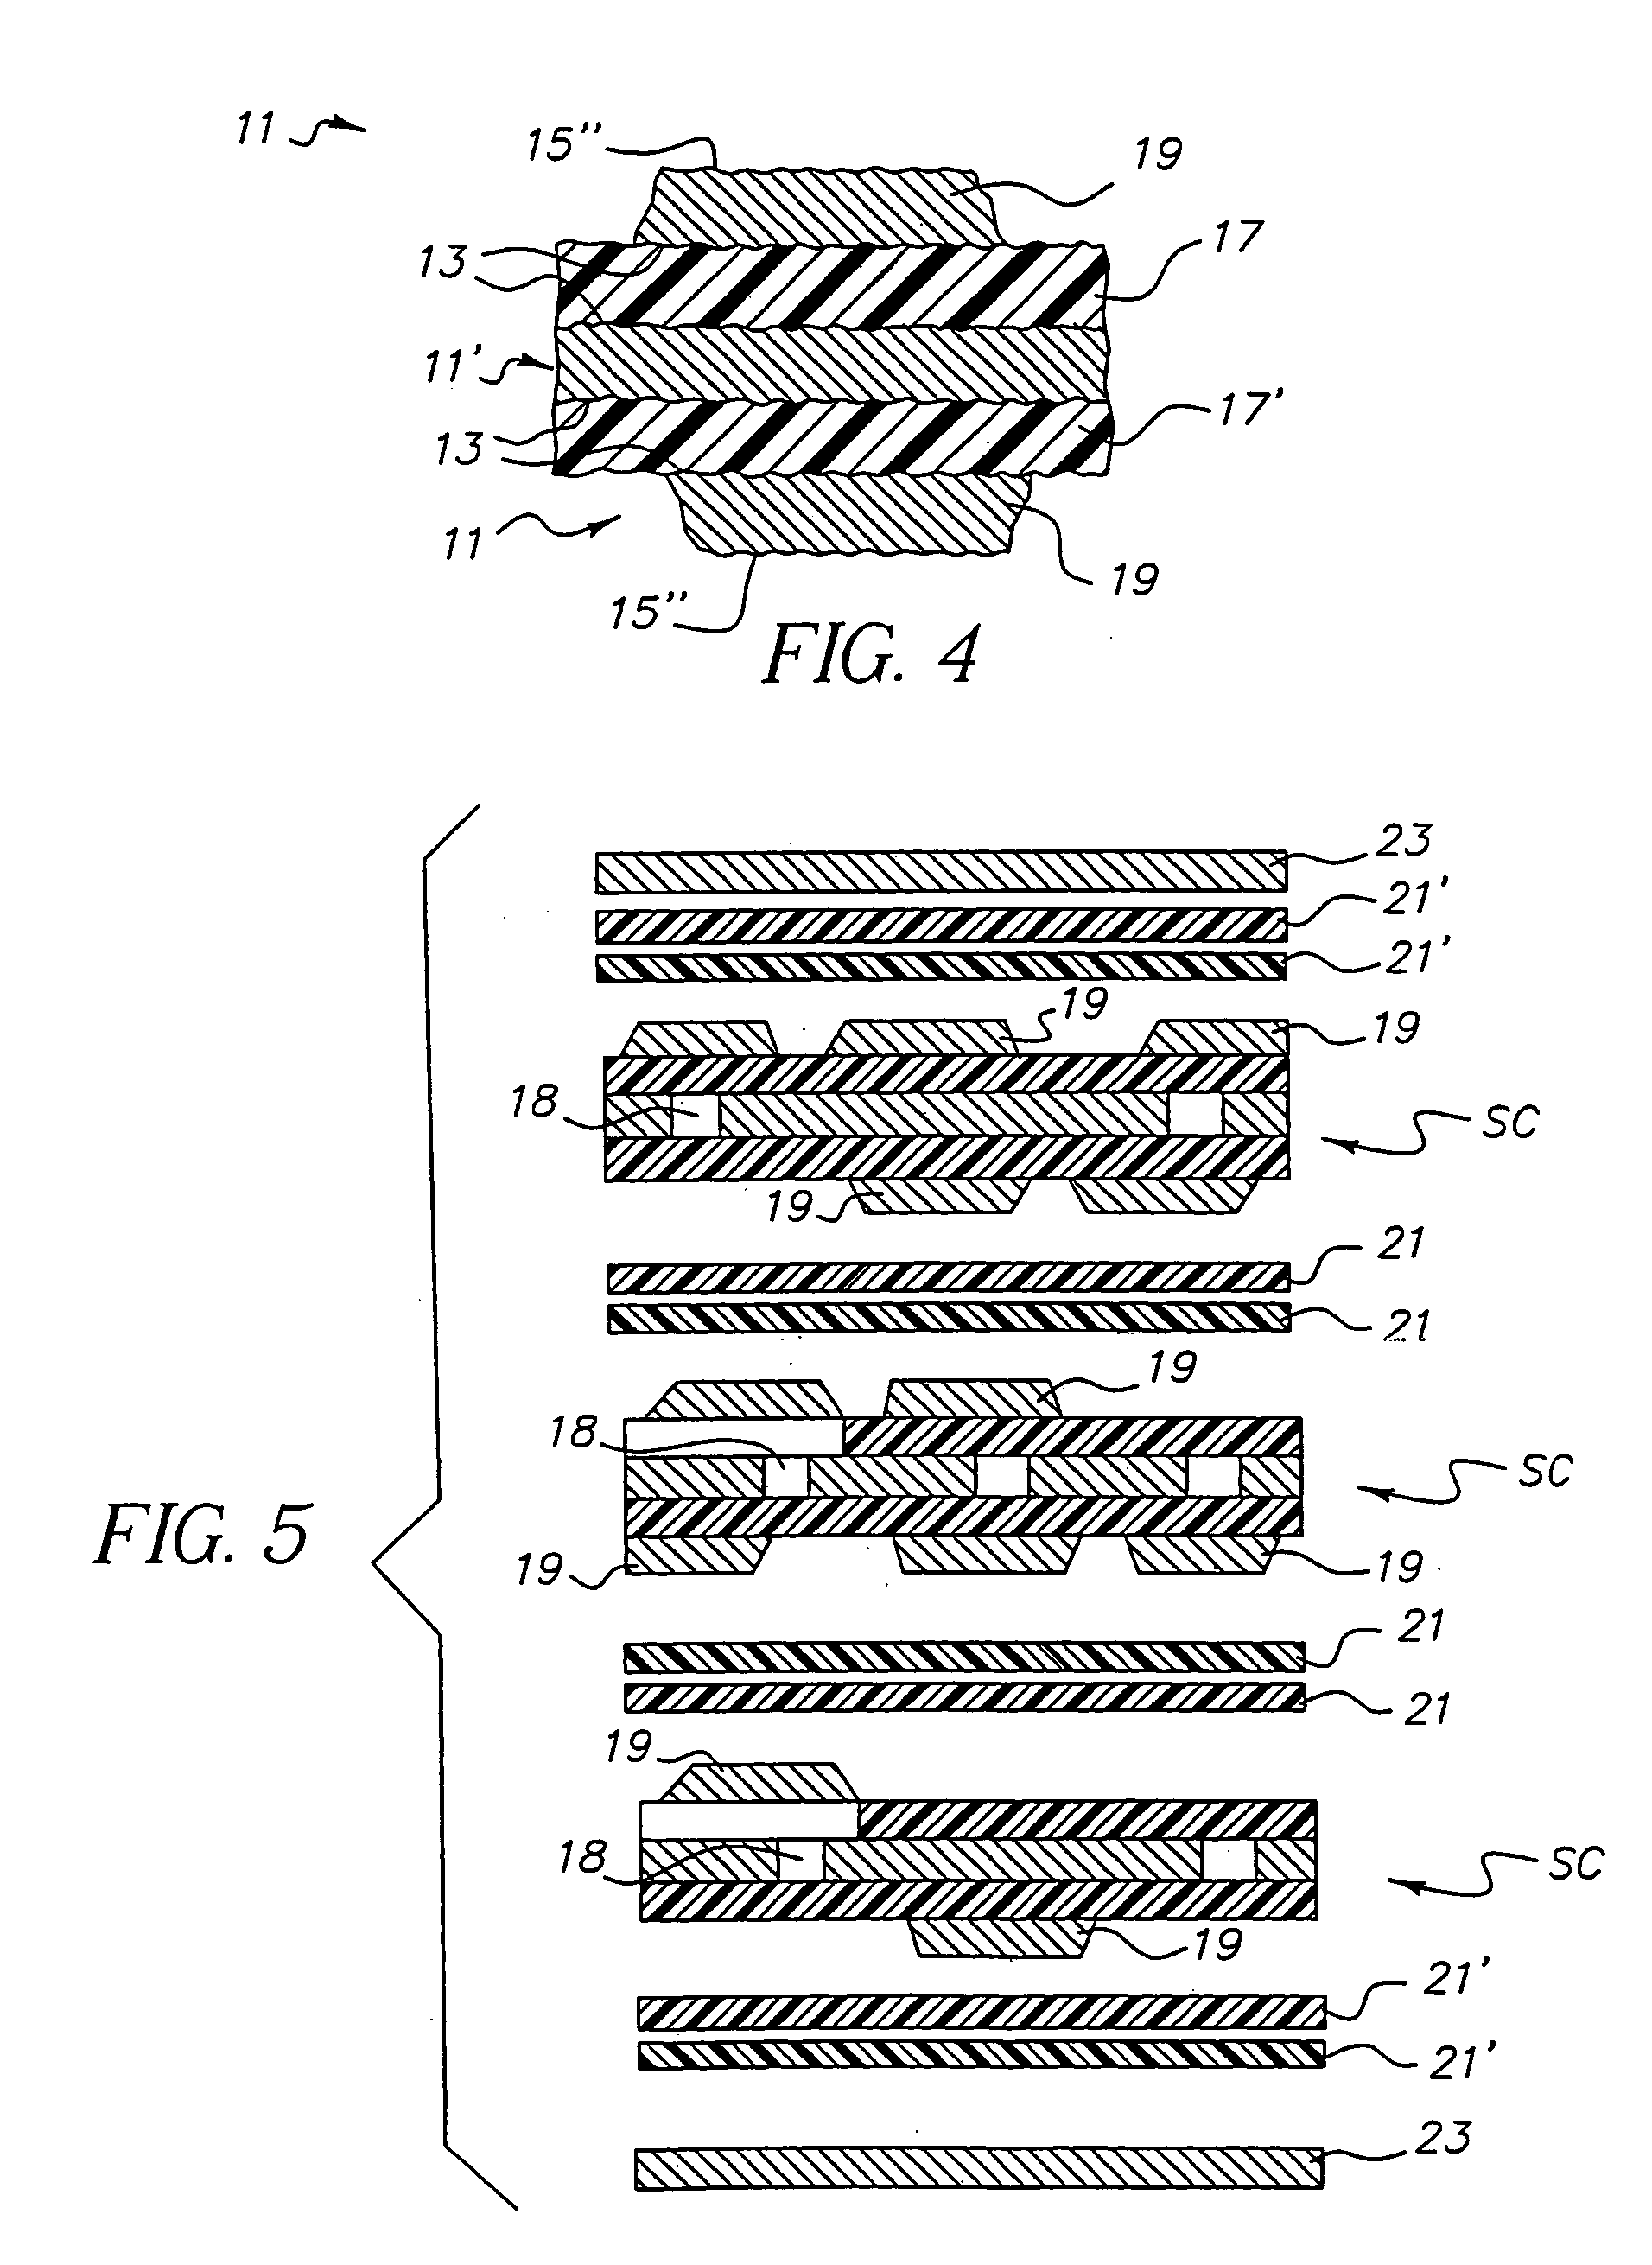 Circuitized substrate utilizing three smooth-sided conductive layers as part thereof and electrical assemblies and information handling systems utilizing same